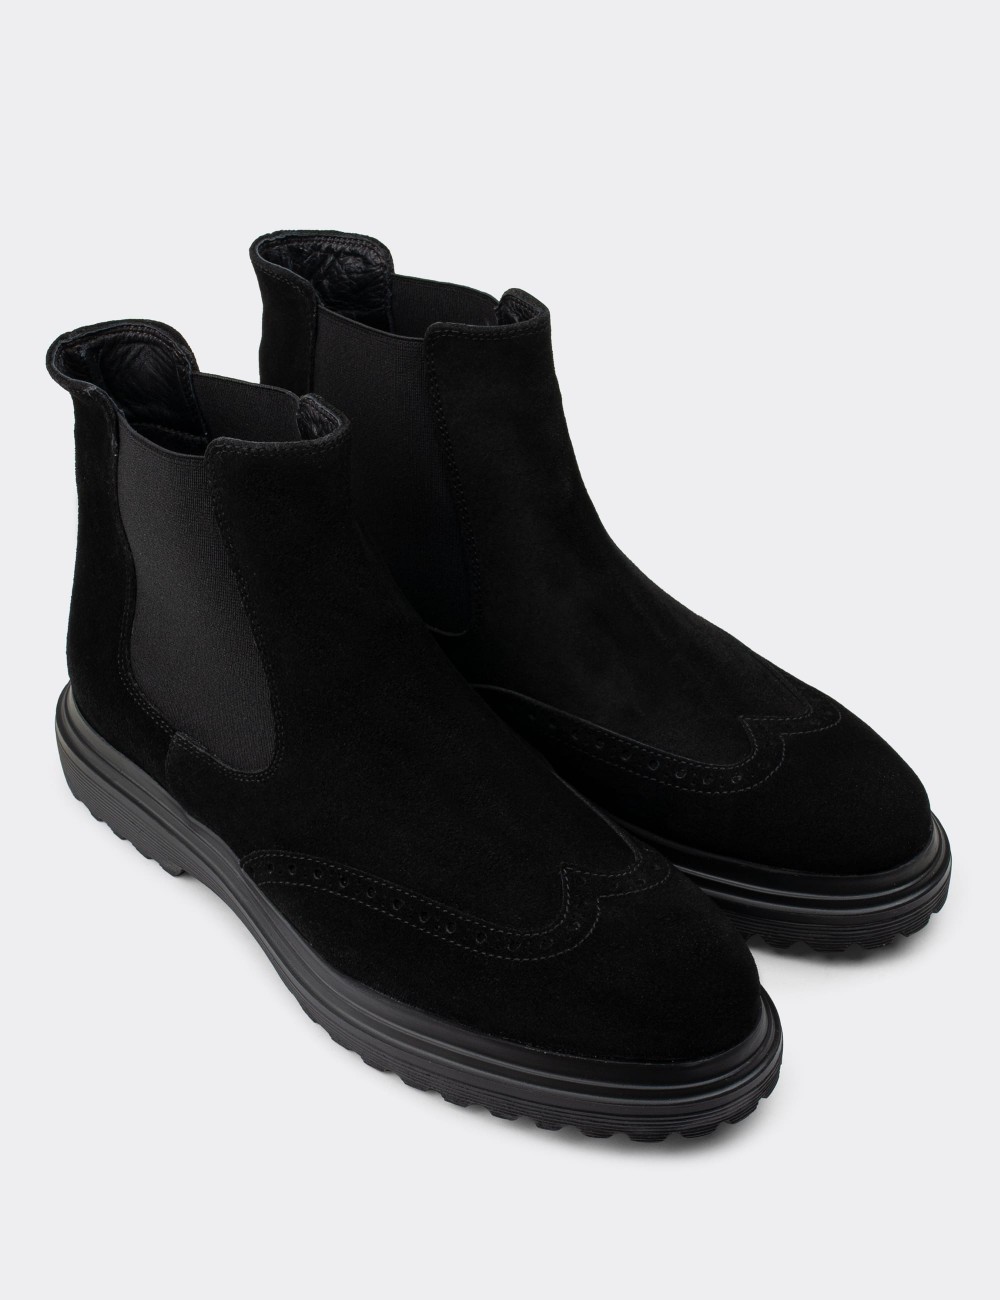 Black Suede Leather Chelsea Boots - 01848MSYHE02